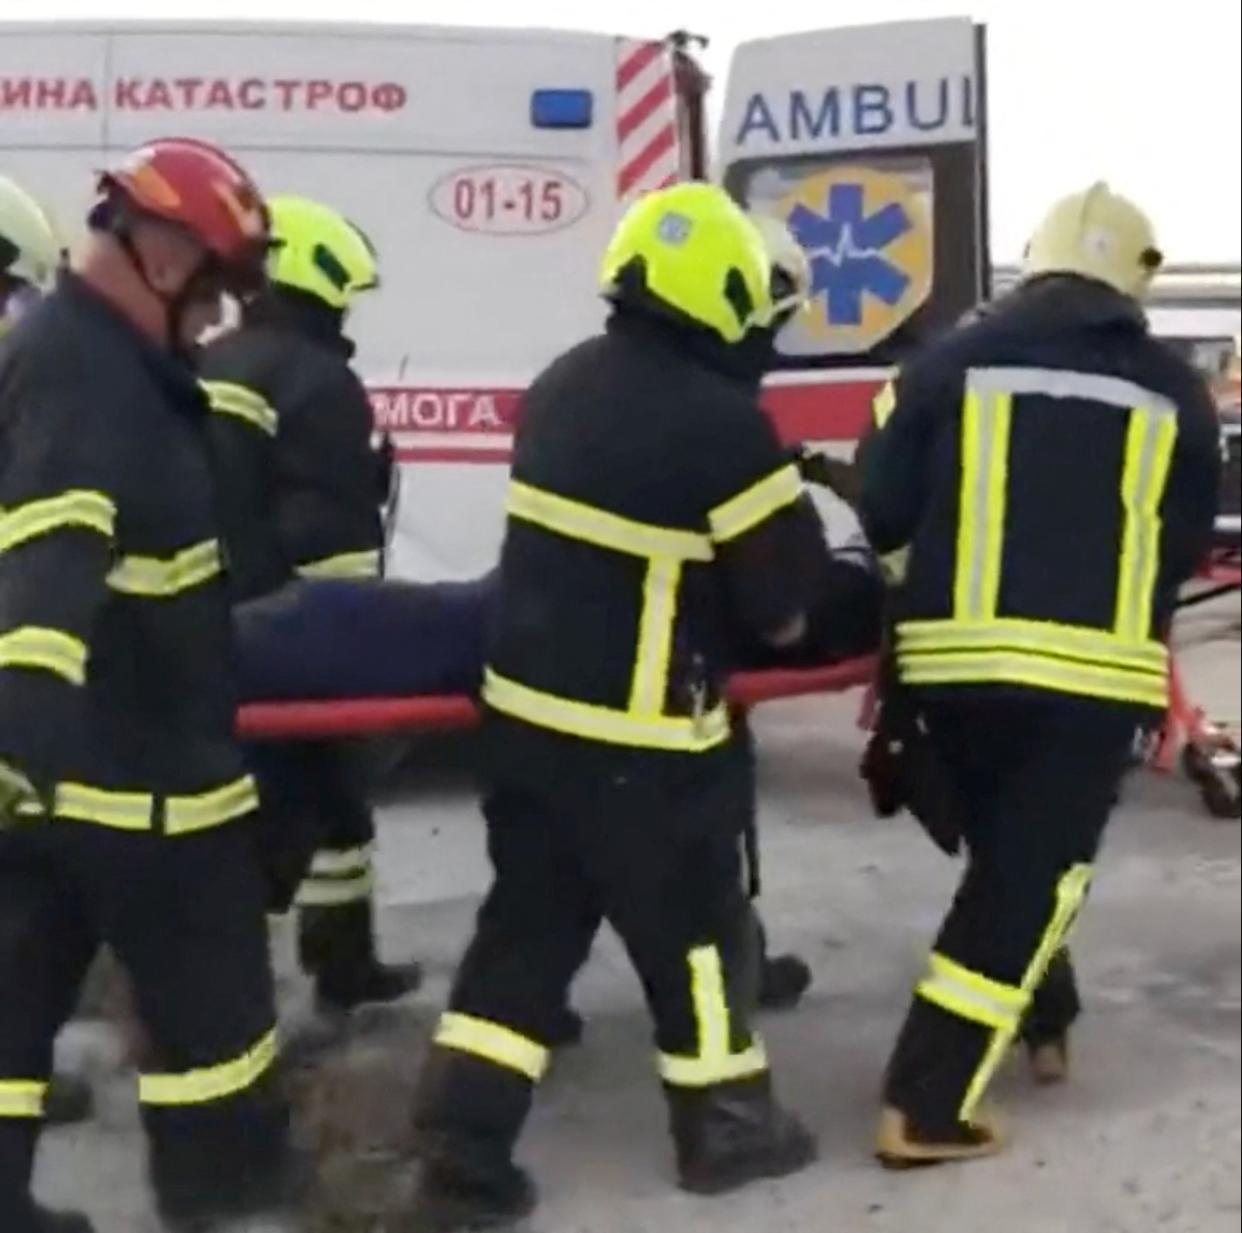 Ukrainian rescuers carry a man on a stretcher after he was pulled out from under the rubble (via REUTERS)